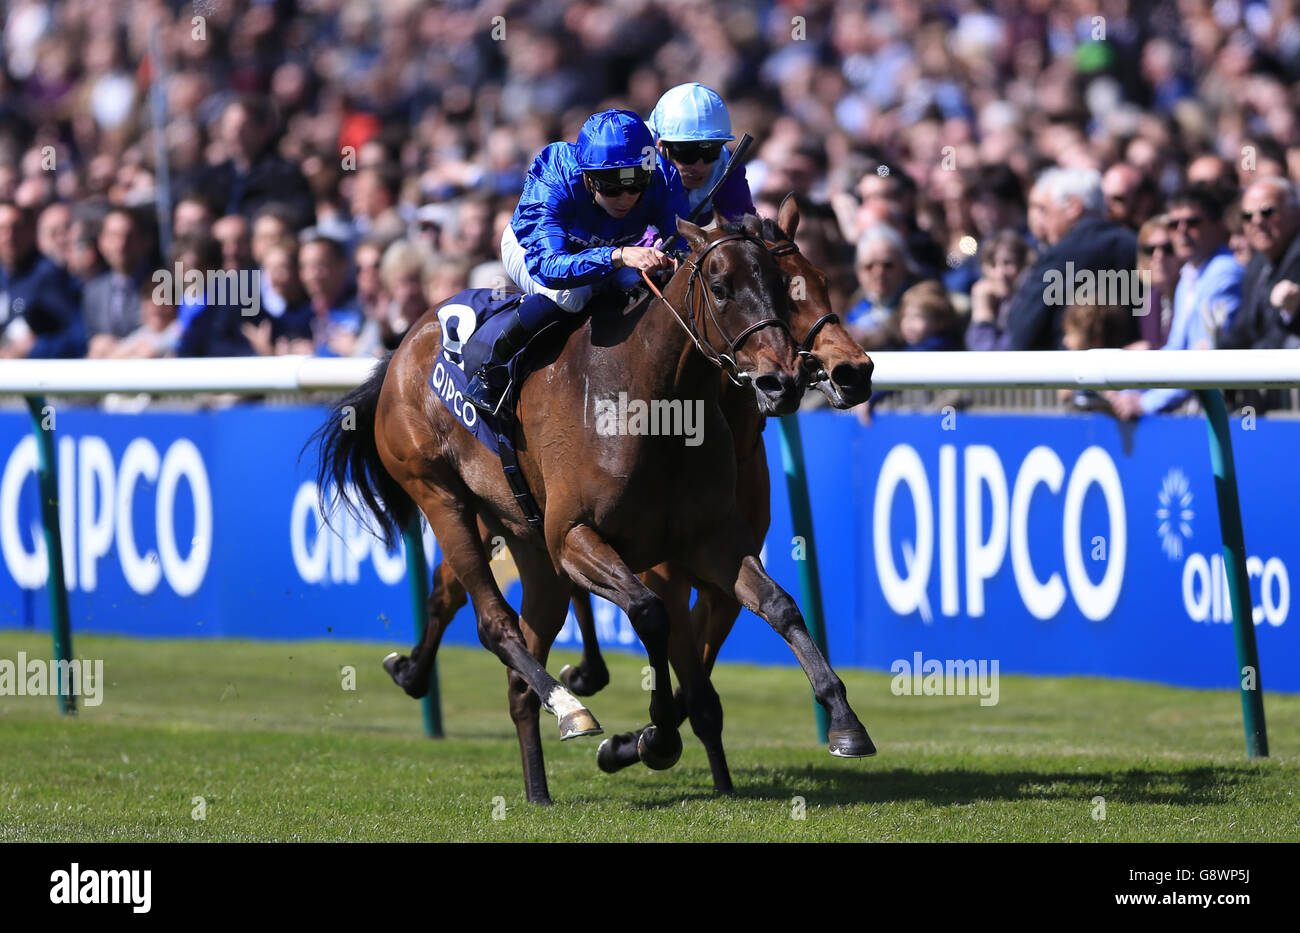 Usherette ridden by Mickael Barzalona (left) wins The Charm Spirit At Tweenhills In 2017 Dahlia Stakes ahead of Arabian Queen ridden by Silvestre De Sousa in second during QIPCO 1000 Guineas Day of the QIPCO Guineas Festival at Newmarket Racecourse. Stock Photo